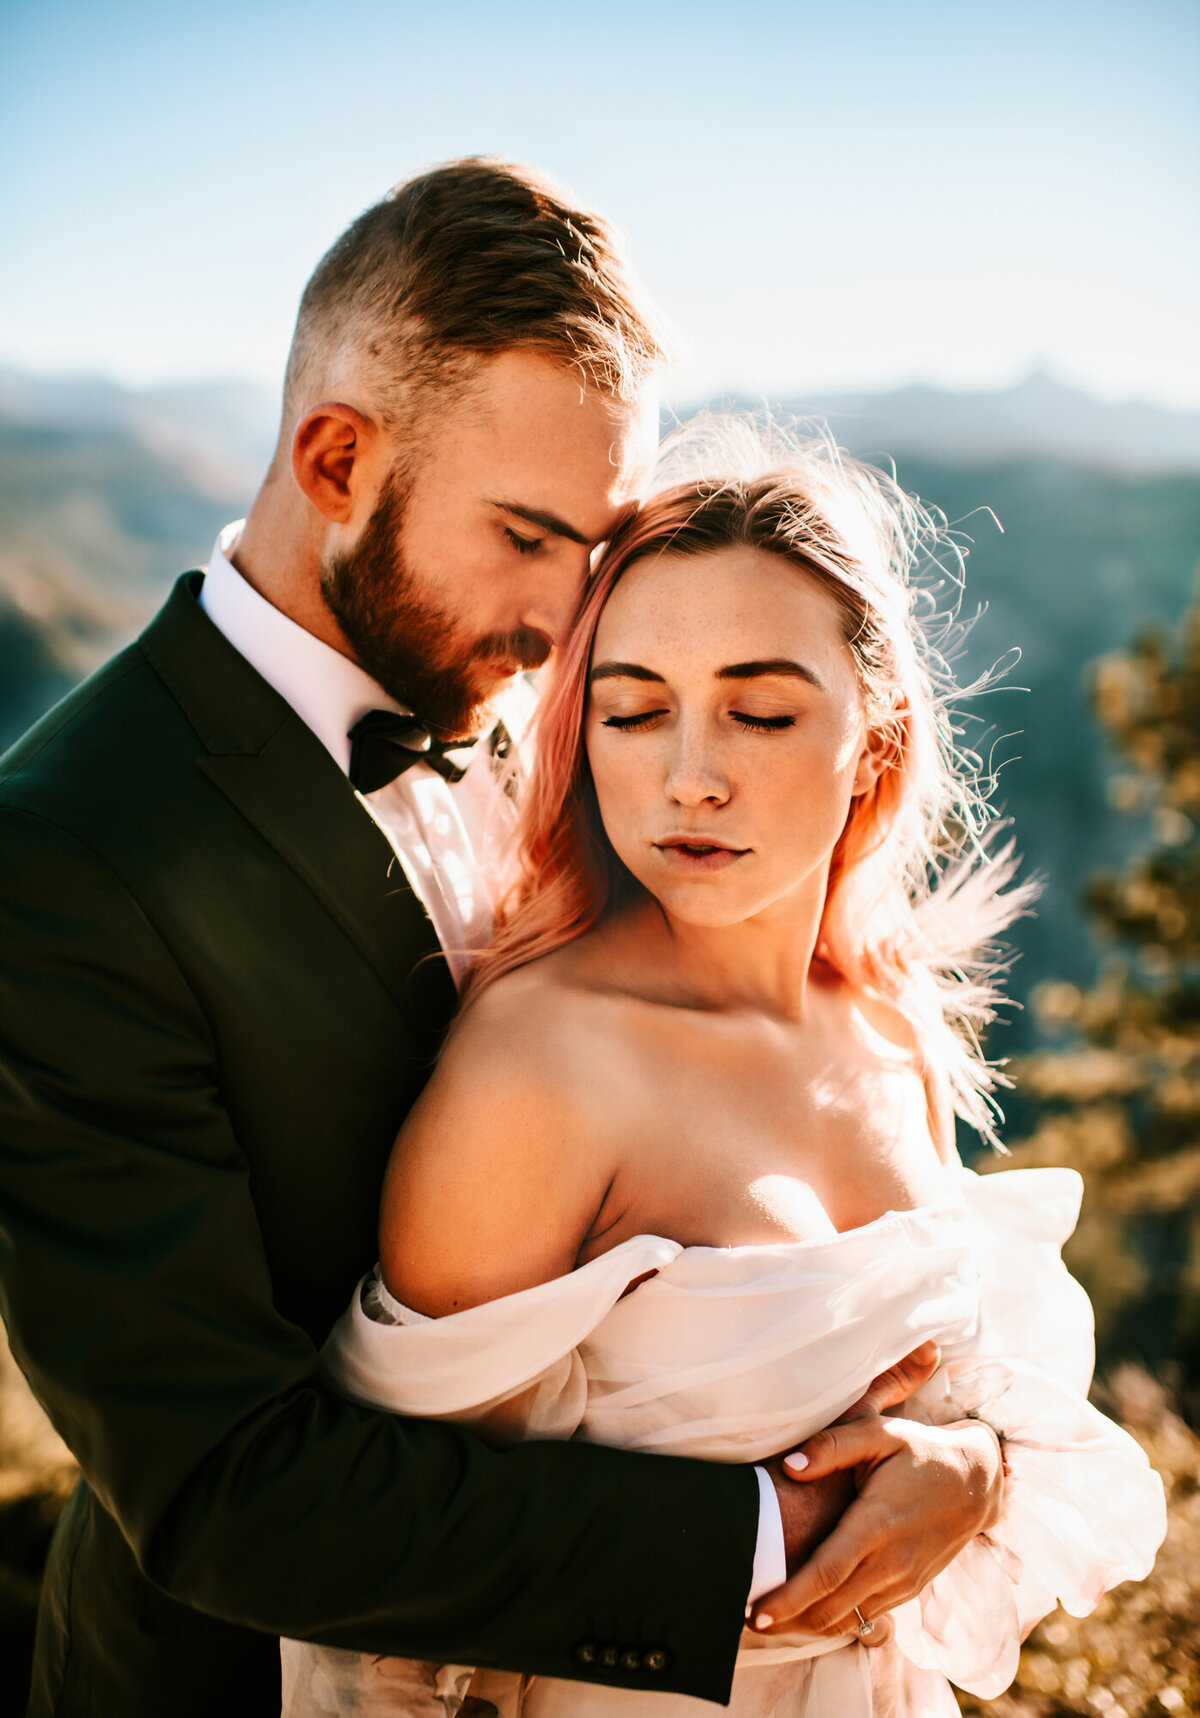 Couples Photography, groom embraces bride from behind as they both savor their day , they are on a mountaintop